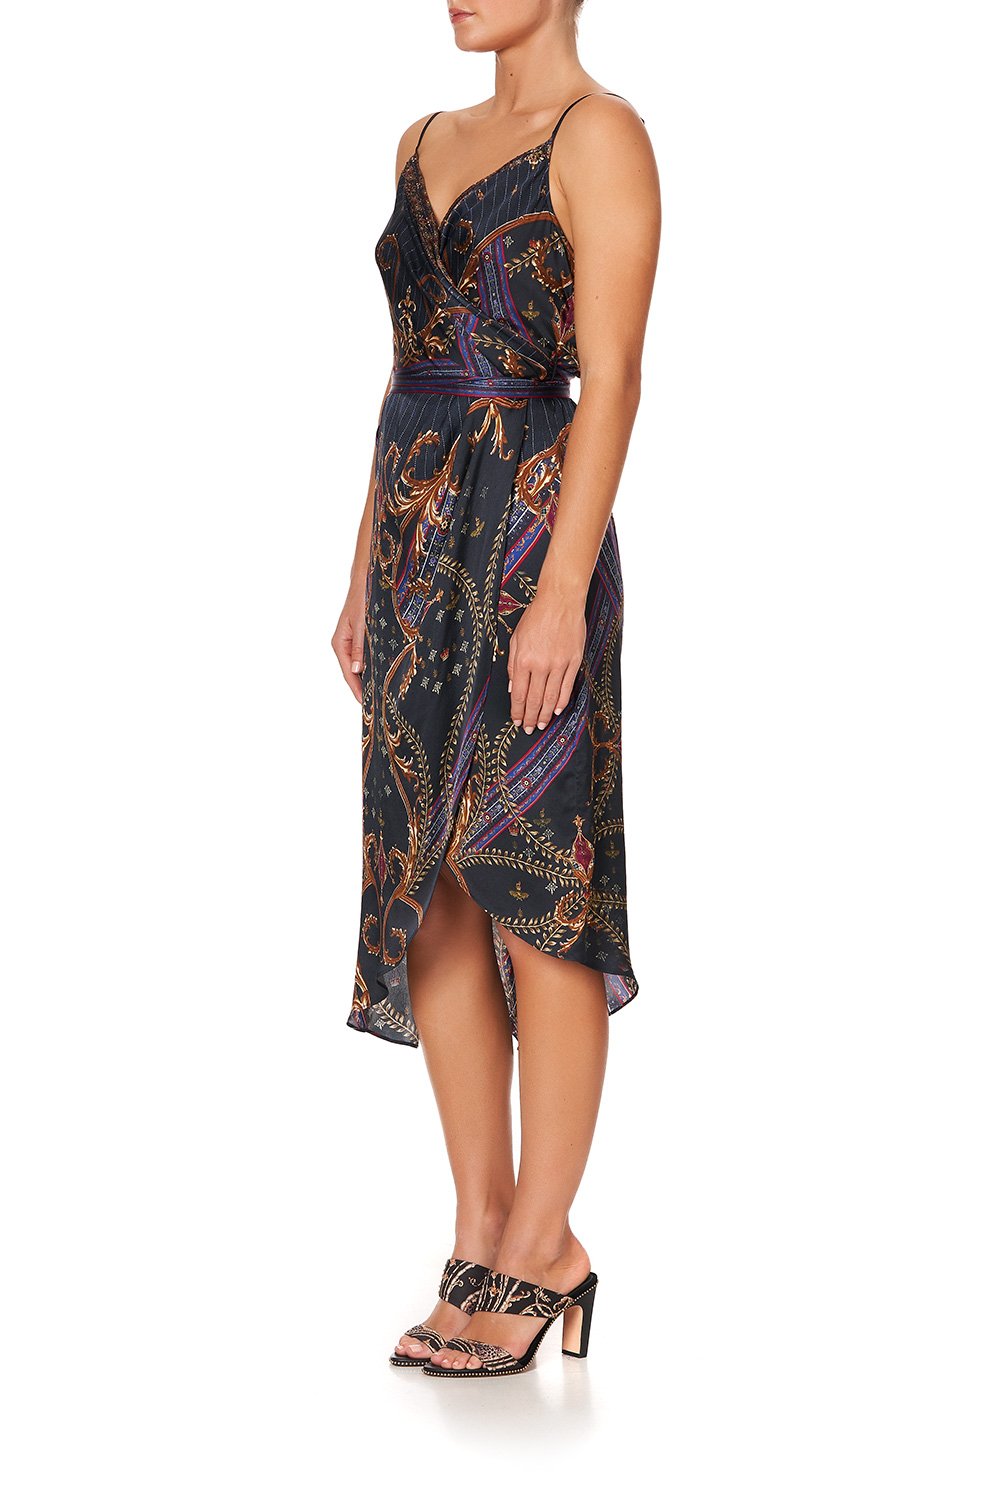 ASYMMETRICAL WRAP DRESS WITH STRAPS DINING HALL DARLING